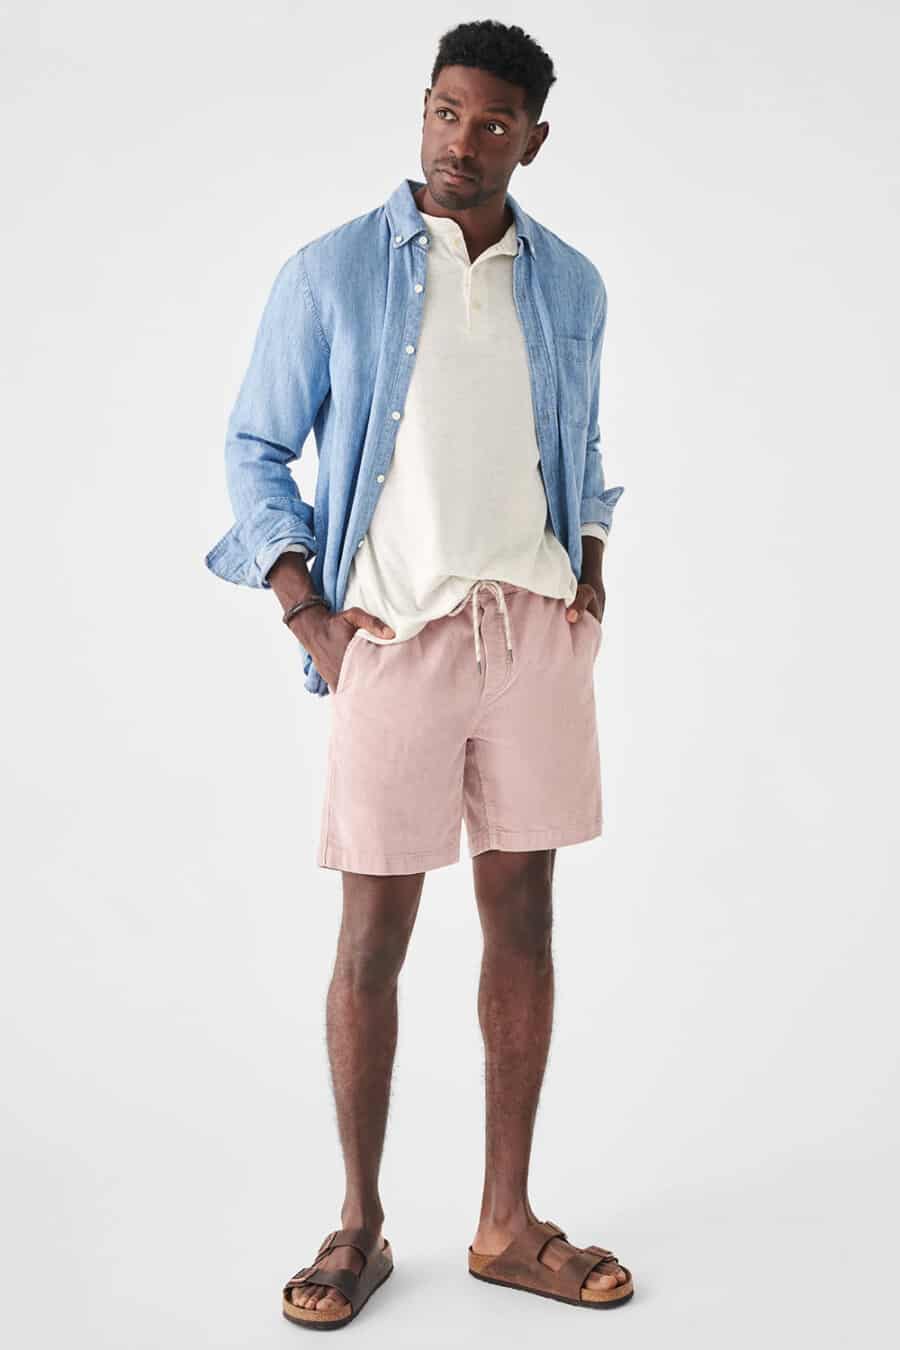 Men's light pink drawstring shorts, white Henley top, light blue linen shirt and brown leather slider sandals outfit